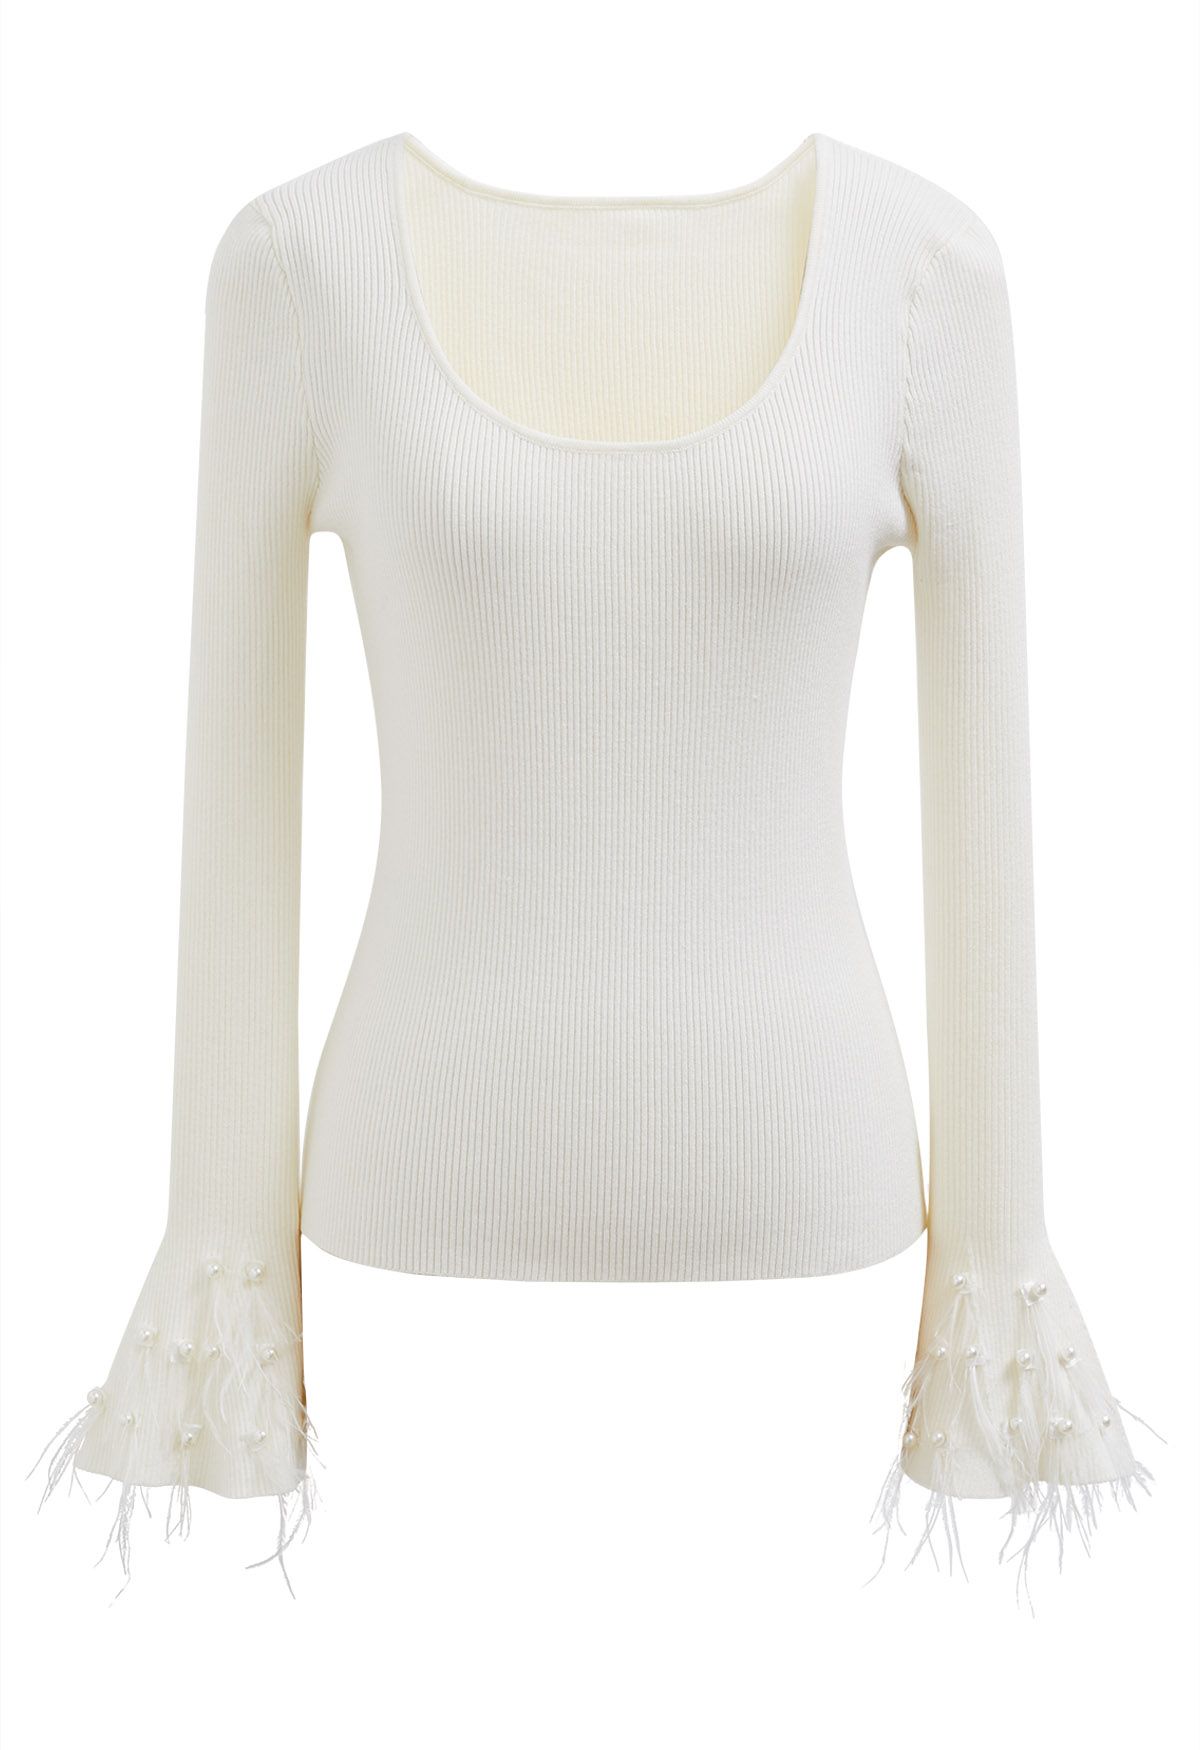 Pearly Feather Cuffs Scoop Neck Knit Top in White